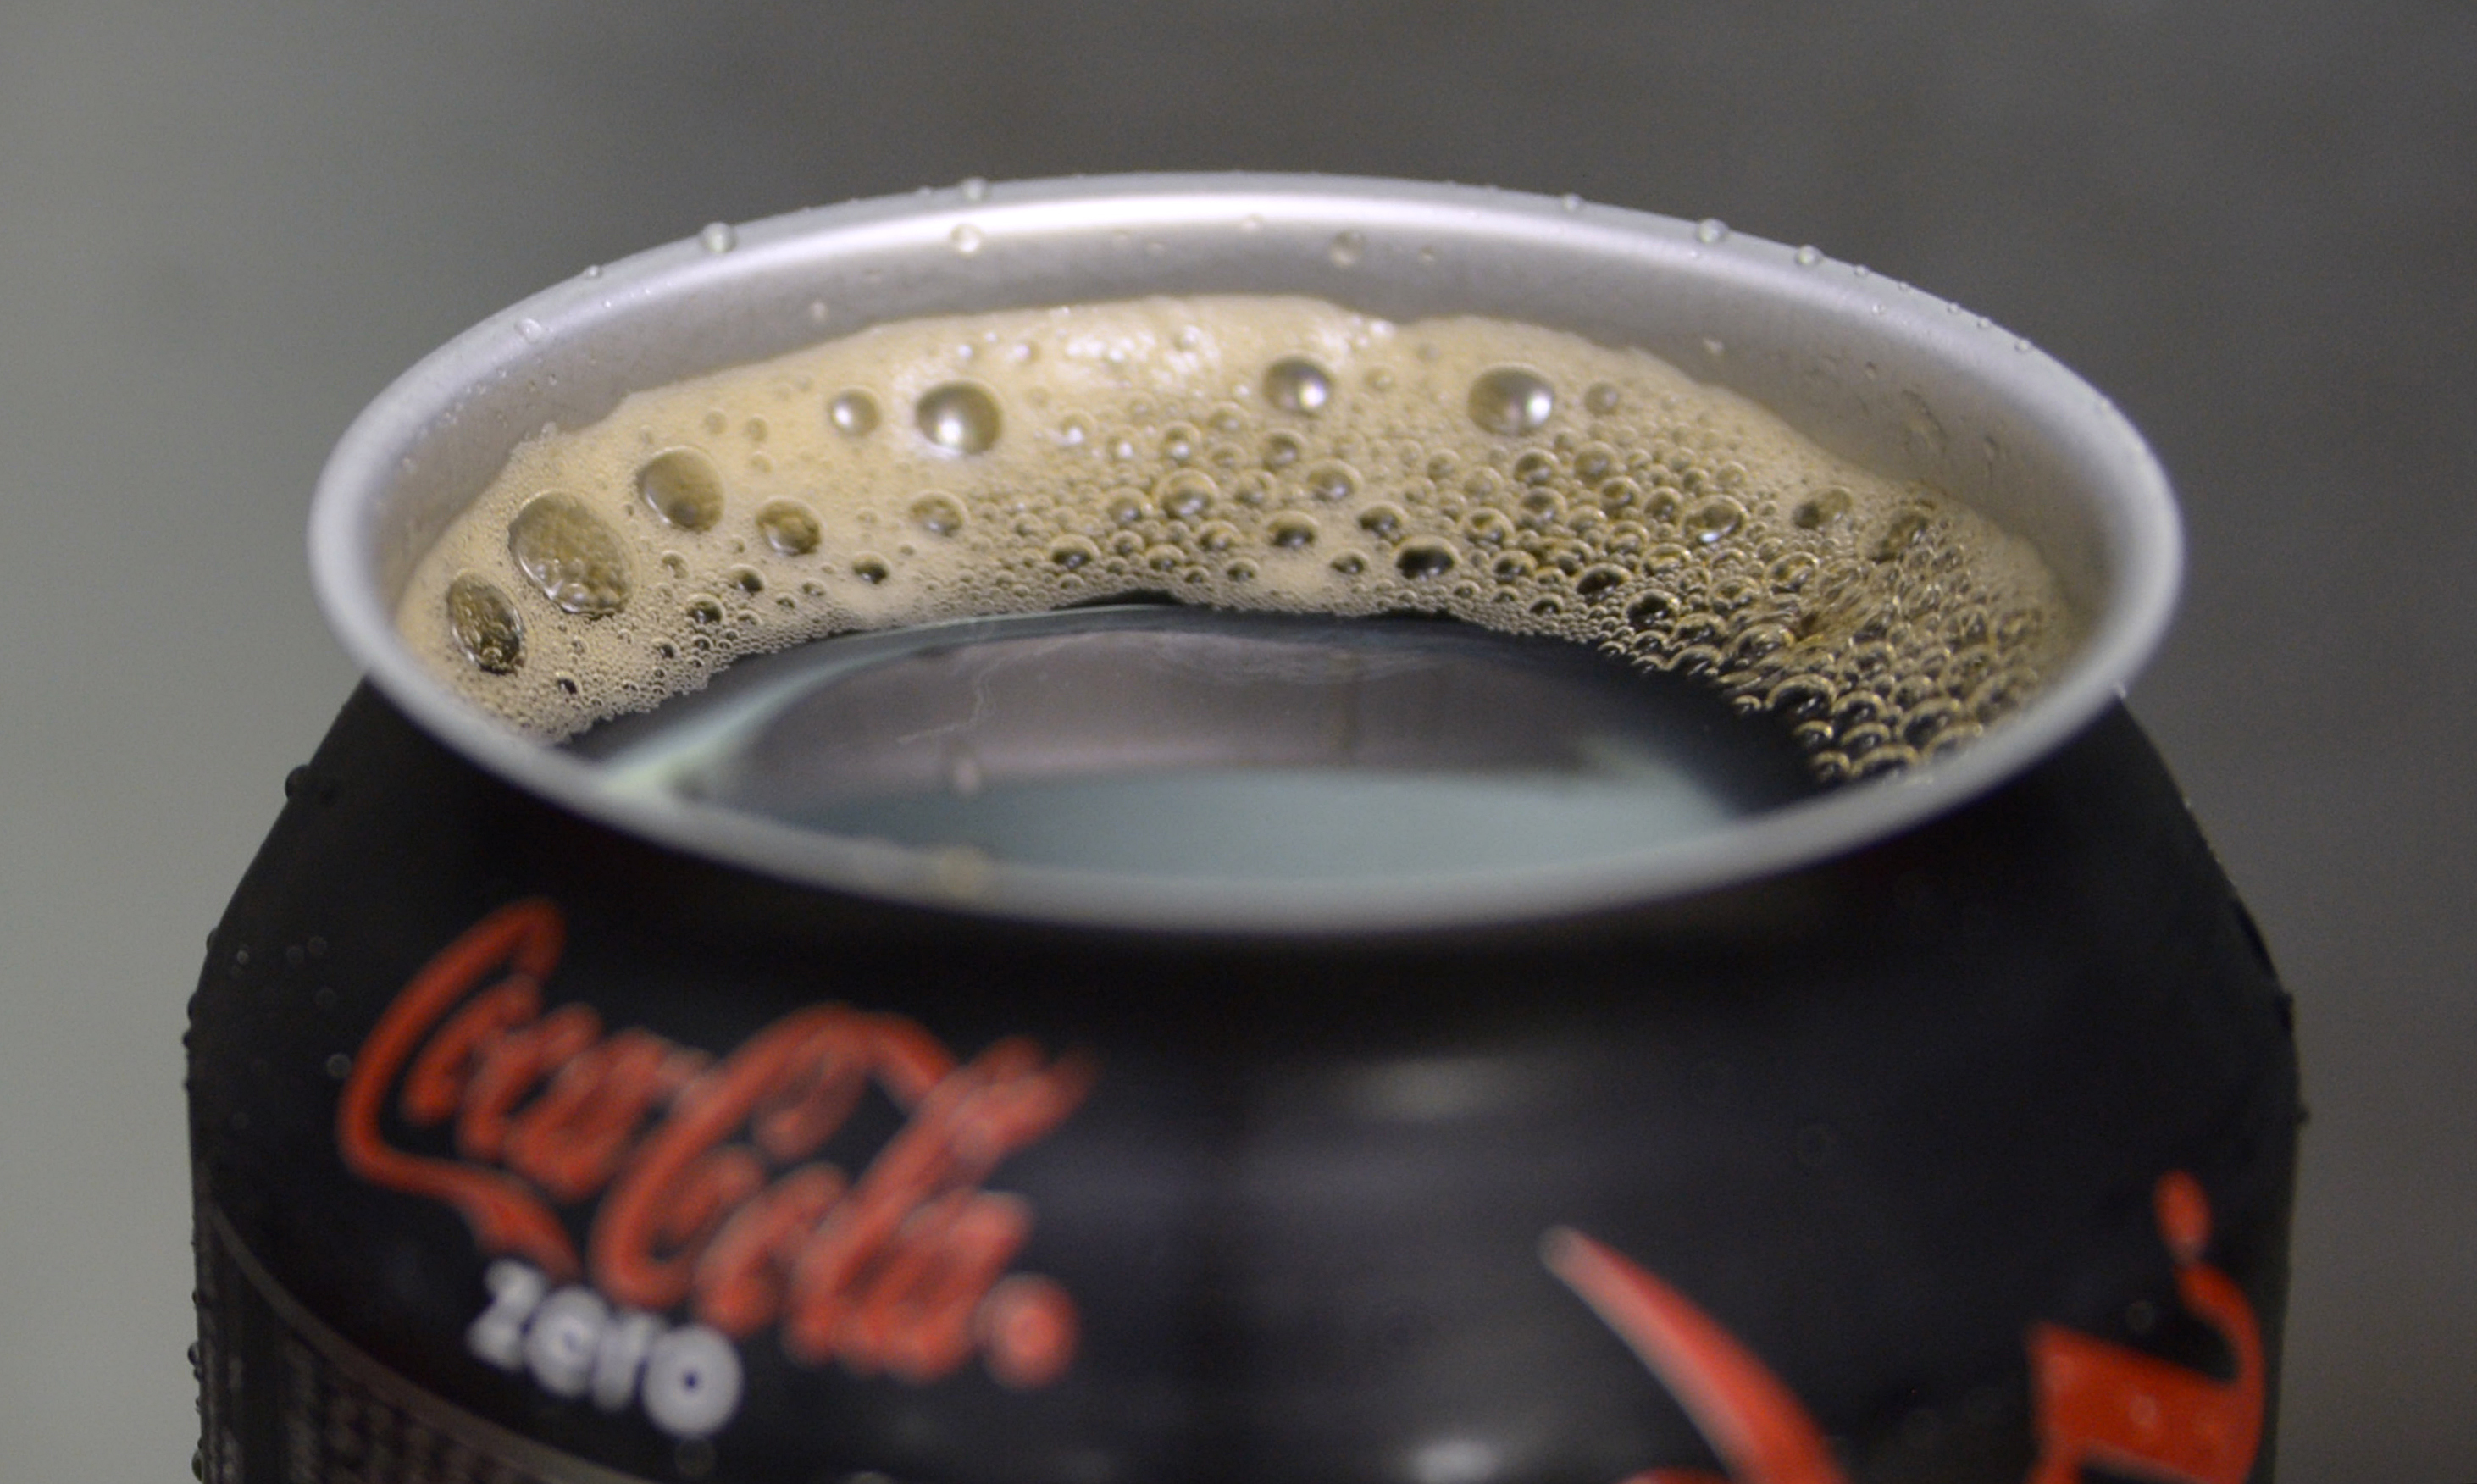 Coke Zero Is Being Killed Off and Replaced With a New Recipe